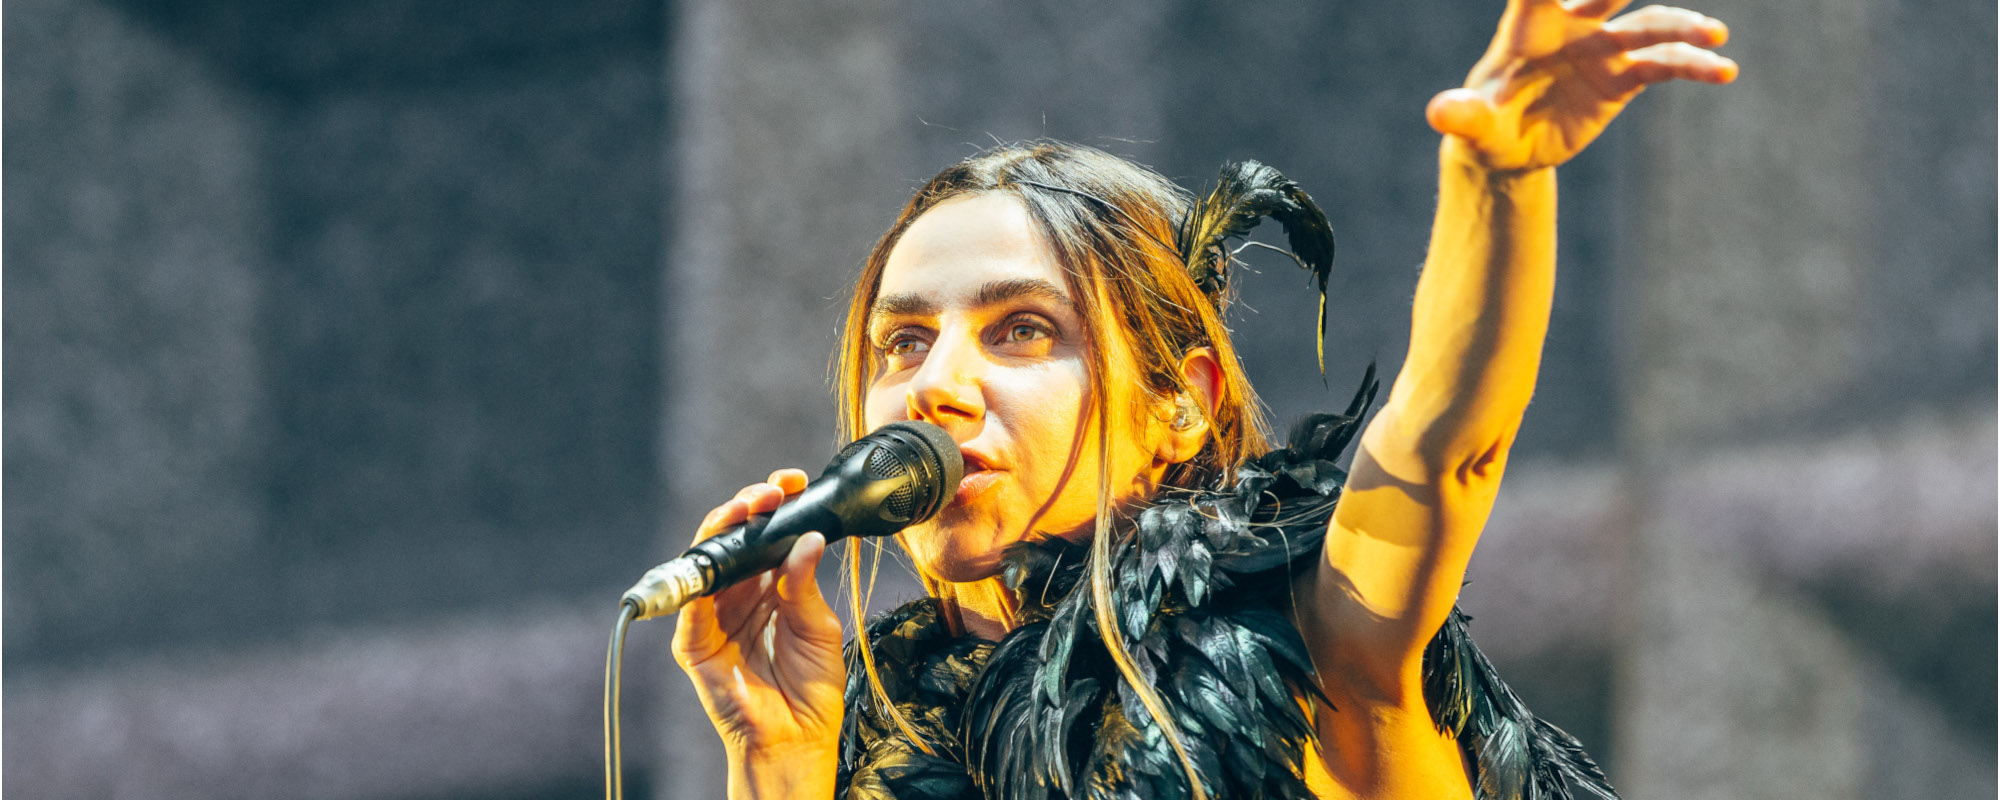 PJ Harvey to Release Box Set of ‘B-Sides, Demos, and Rarities’—“Some of These Lesser-Known Works are Closer to my Heart”